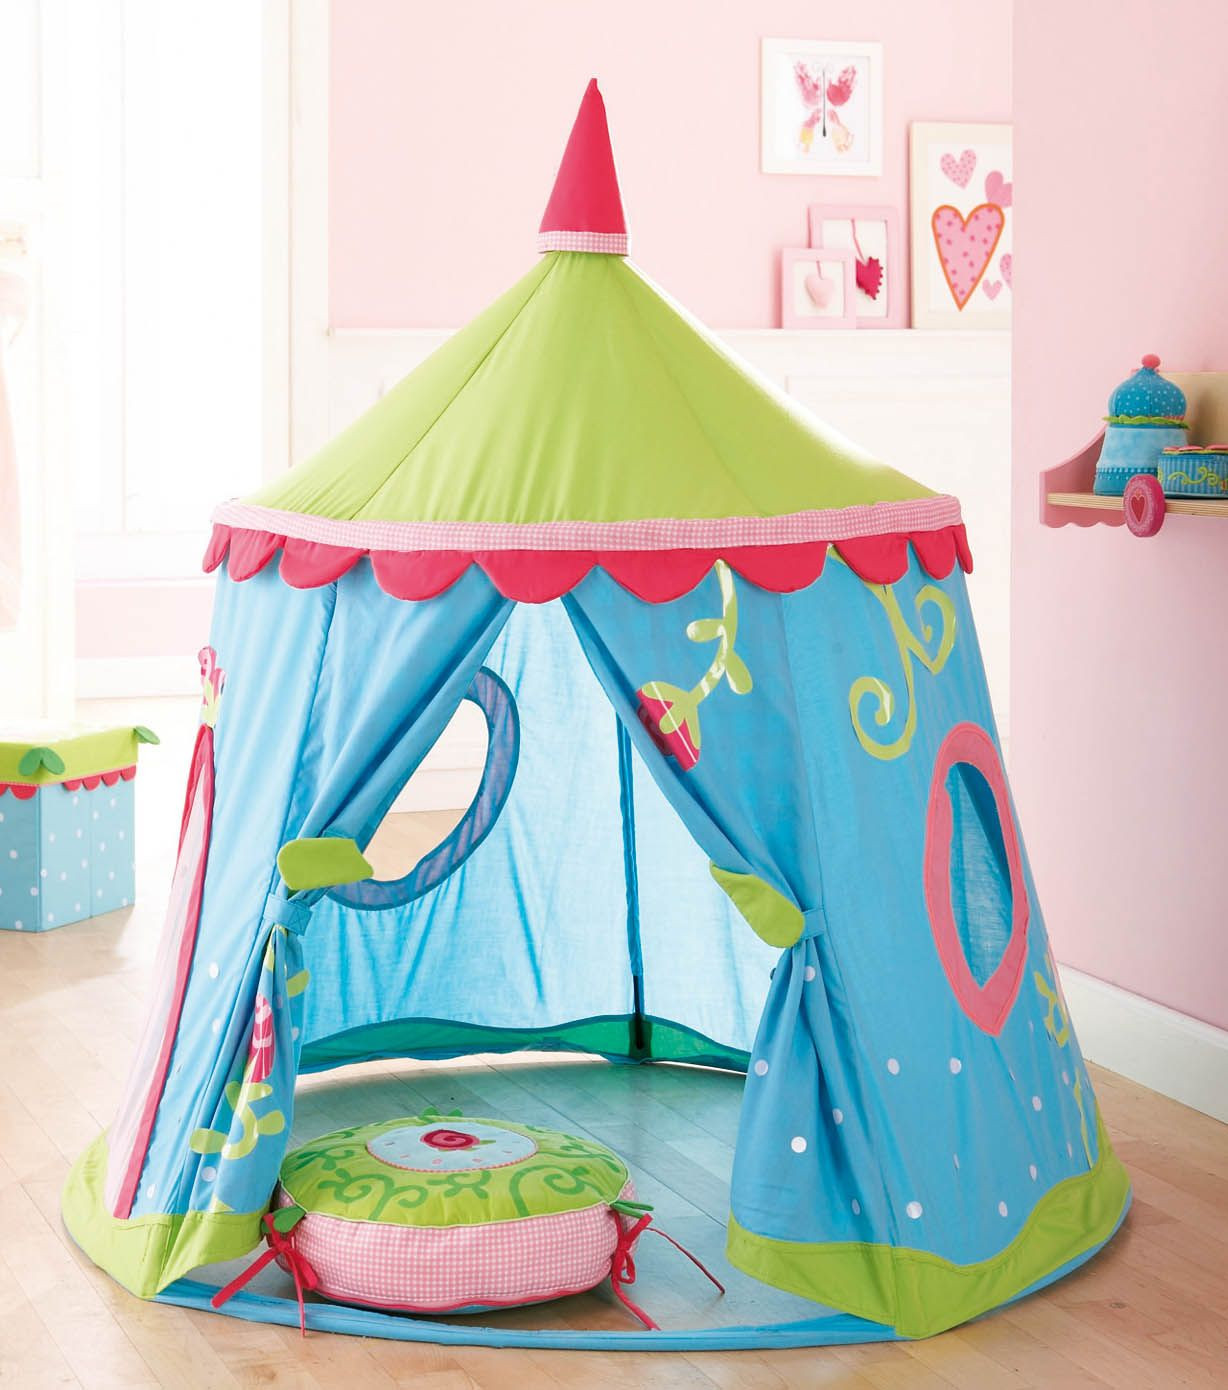 Indoor Play Tent For Kids
 Play Tent Girls & Holo Kids Play Tents Girl Child Children